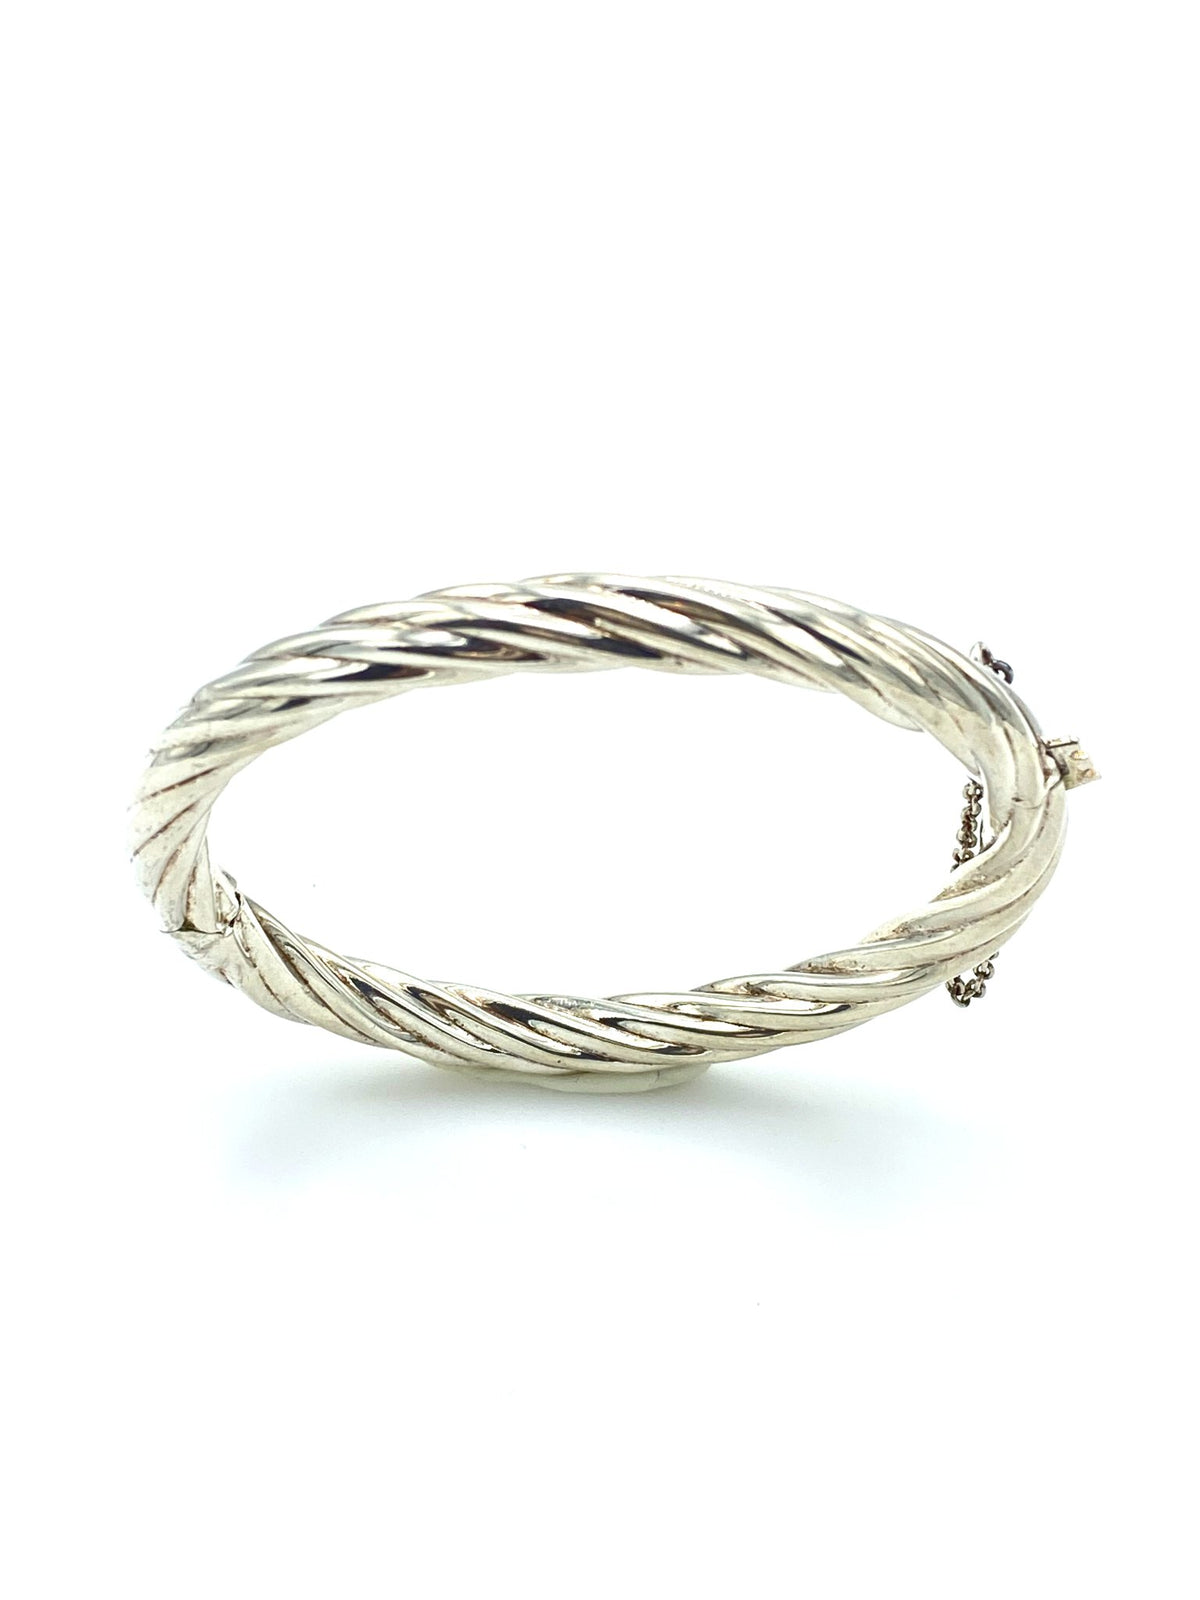 Sterling Silver Twisted Hinged Vintage Bangle Bracelet - 24 Wishes Vintage Jewelry